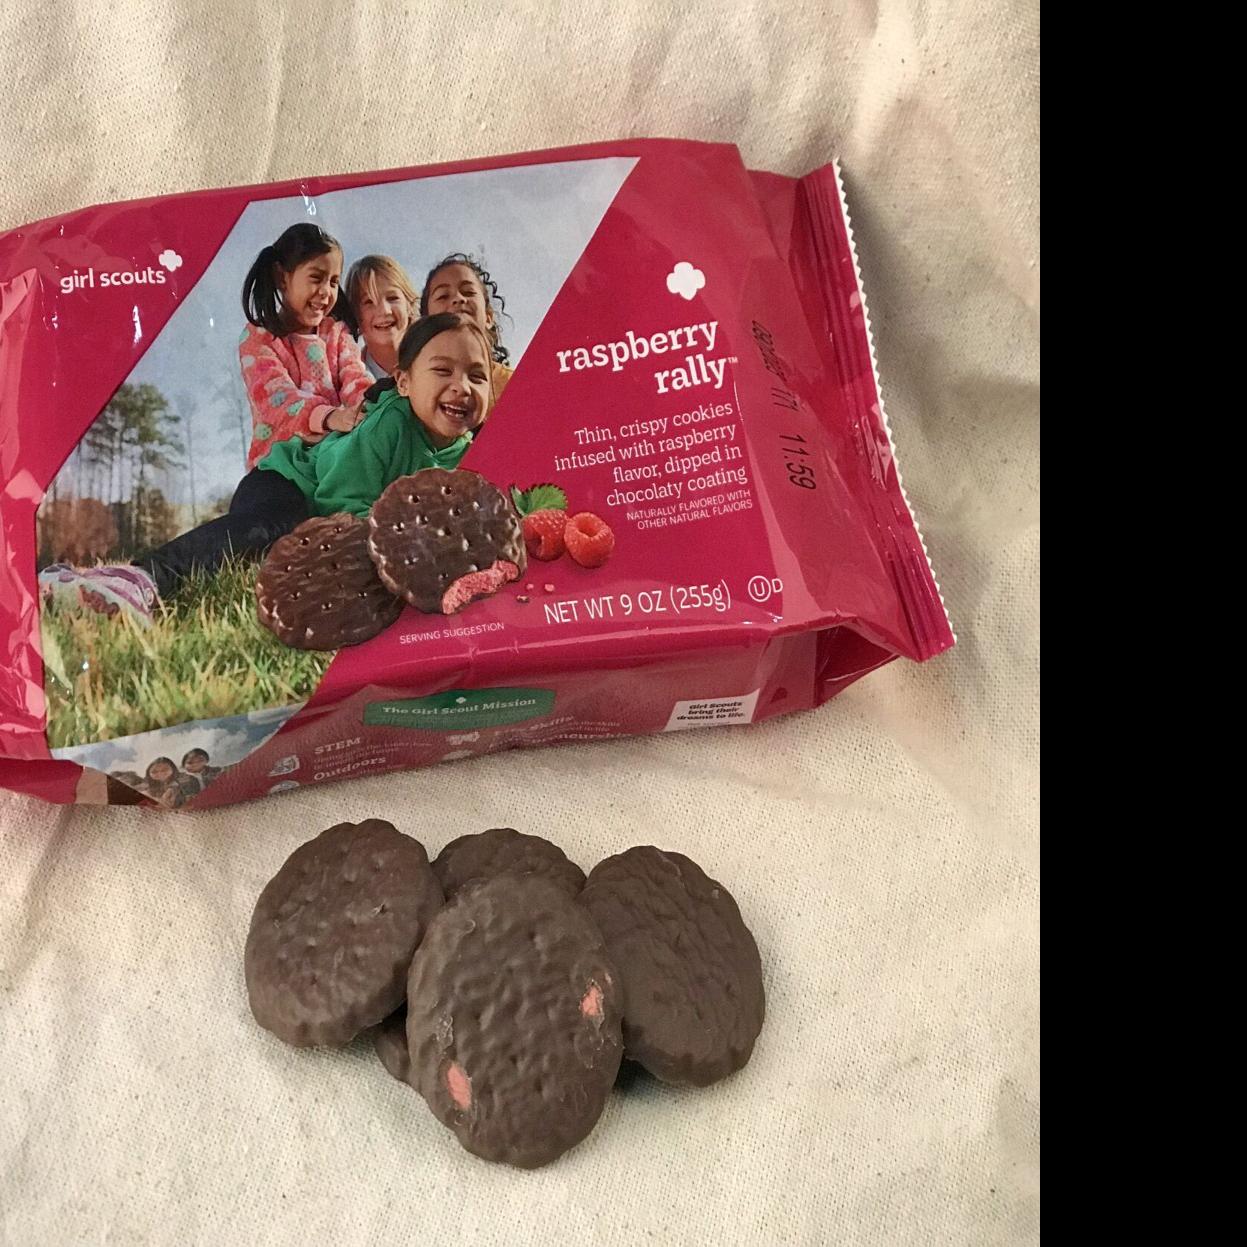 Raspberry Rally Girl Scout Cookie Boxes Selling on  at High Prices